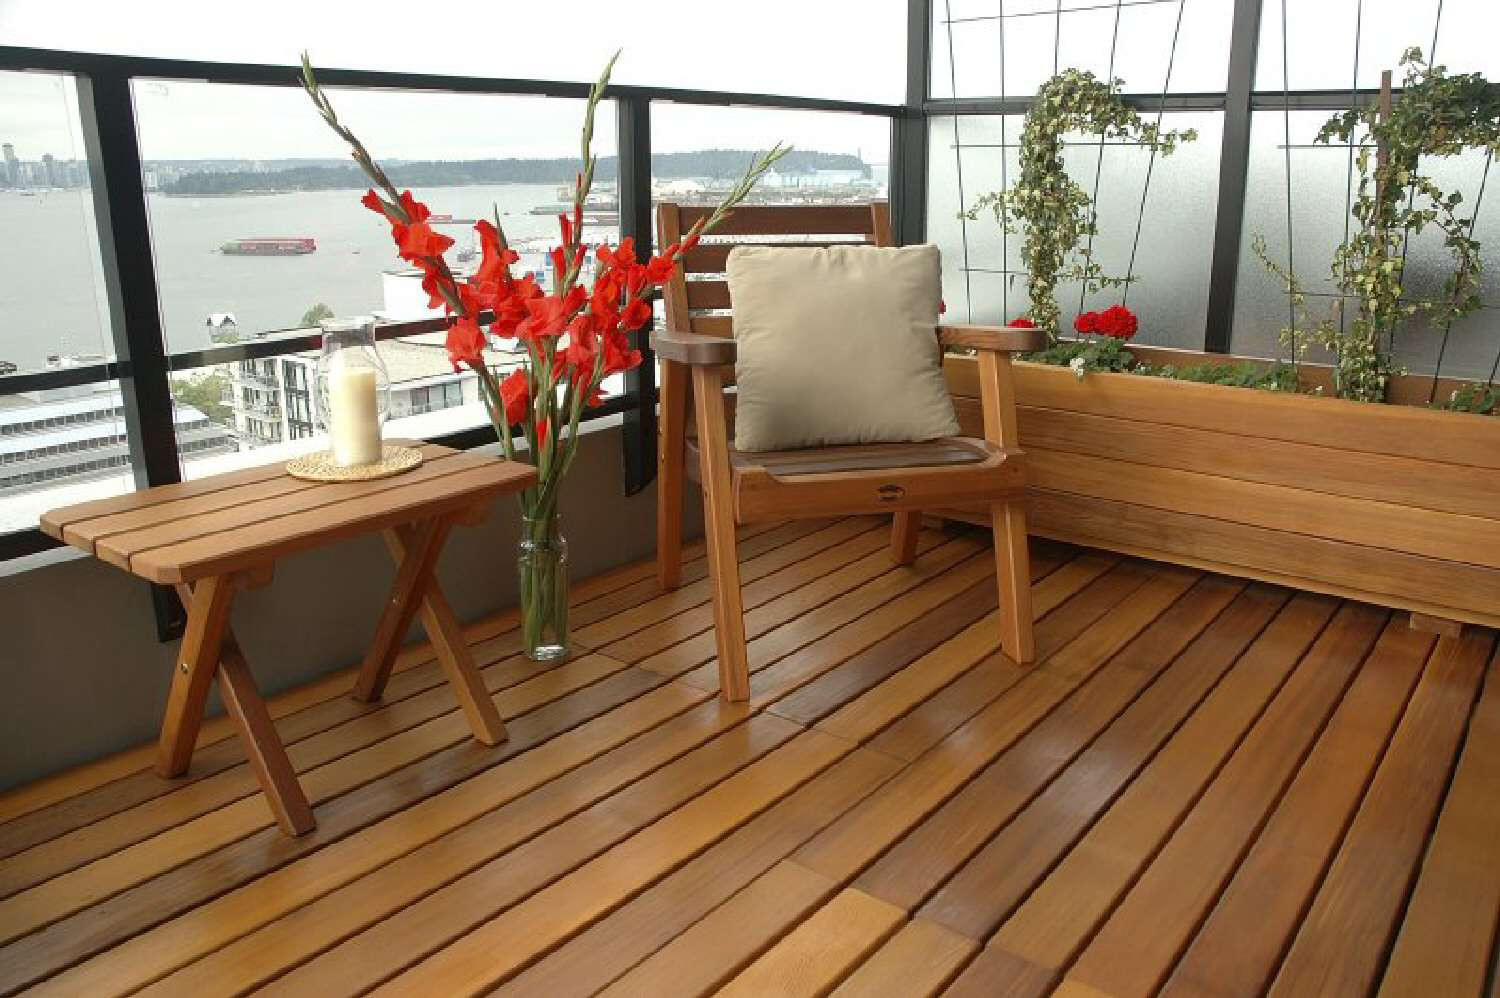 27 Lovely Pc Hardwood Floors Linden Nj 2023 free download pc hardwood floors linden nj of the best woods for decks and porches for western red cedar decking with matching table and chair